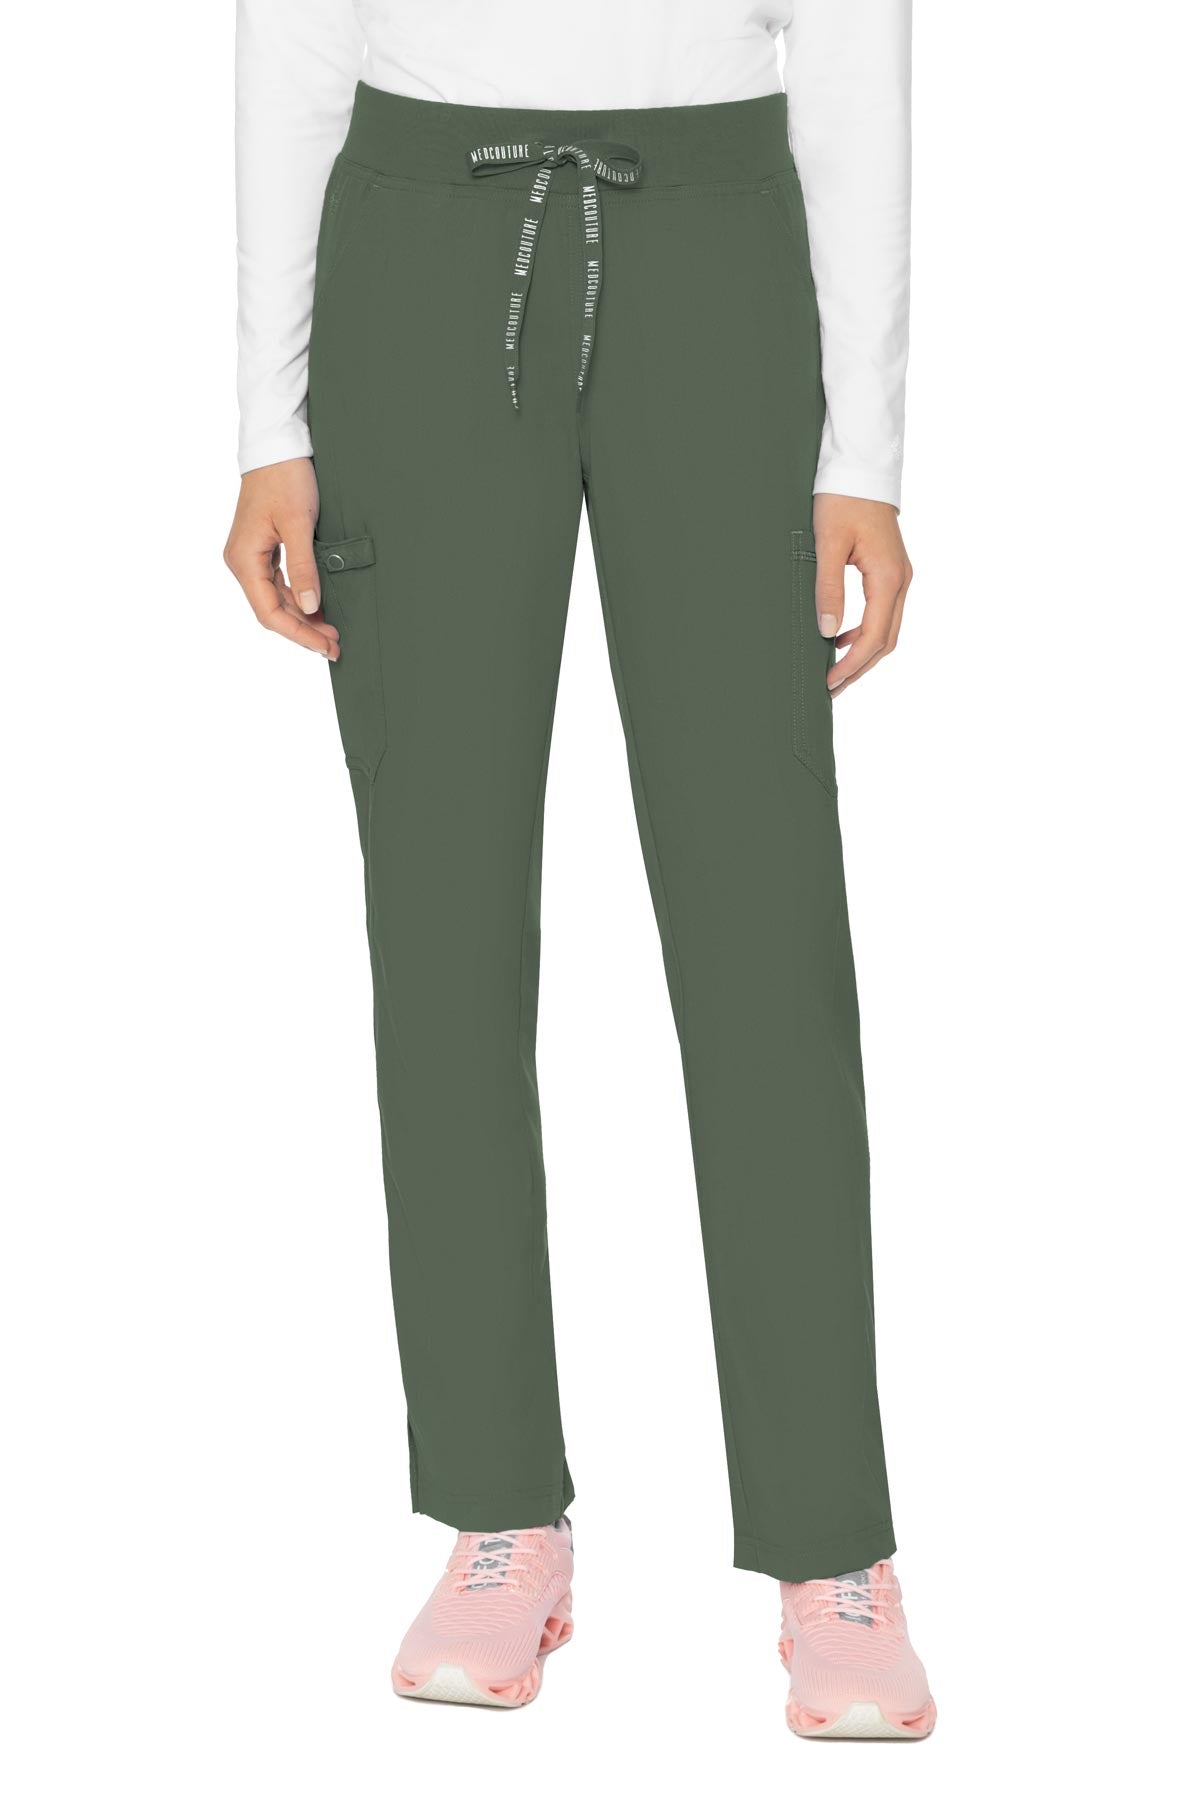 Med Couture Touch 7725 Women's Yoga 2 Cargo Pant Olive